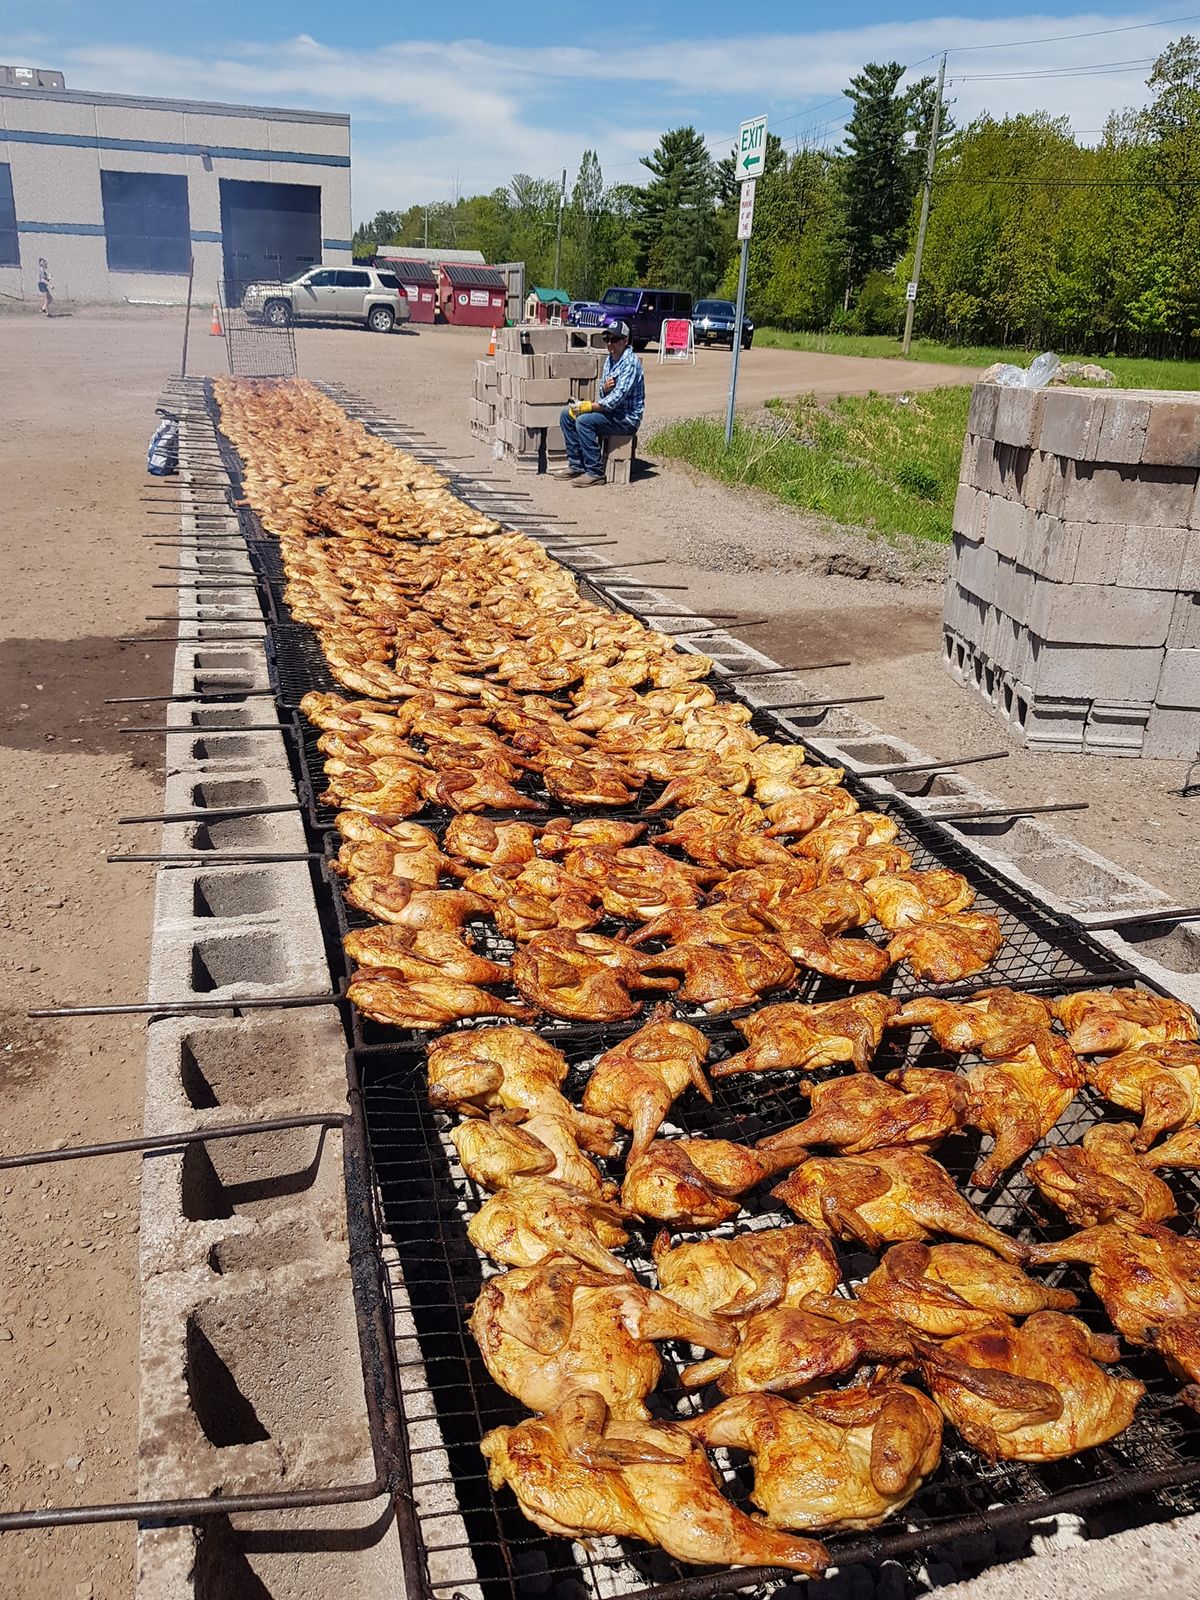 67th Annual Kiwanis Chicken Barbeque